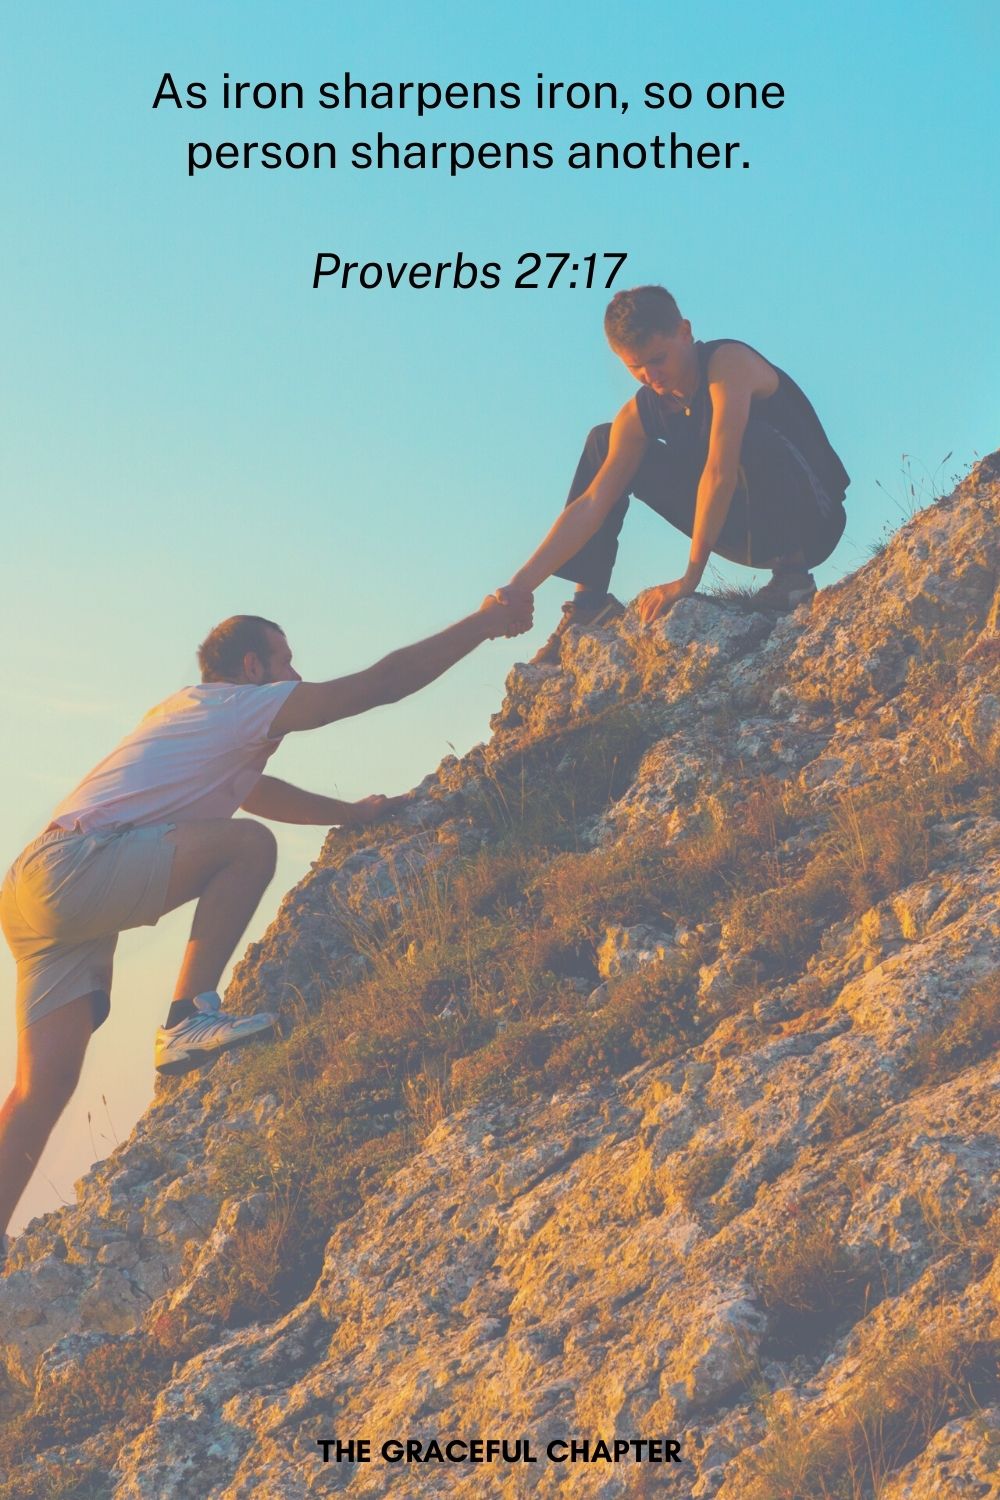 As iron sharpens iron, so one person sharpens another.
Proverbs 27:17